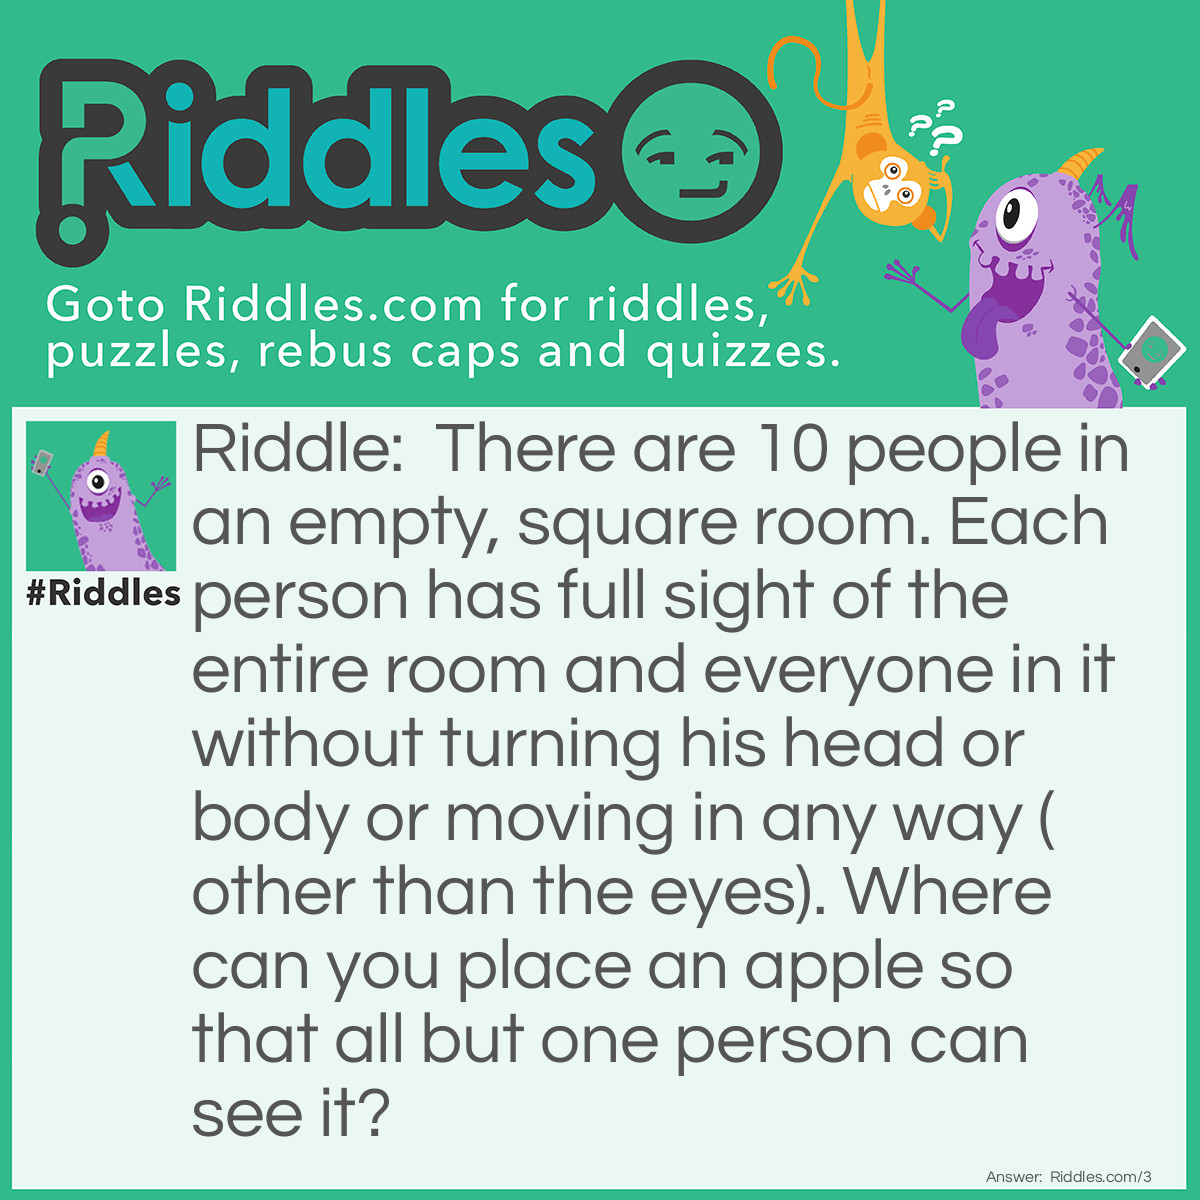 Riddle: There are 20 people in an empty, square room. Each person has full sight of the entire room and everyone in it without turning his head or body, or moving in any way (other than the eyes). Where can you place an apple so that all but one person can see it? Answer: Place the apple on one person's head.